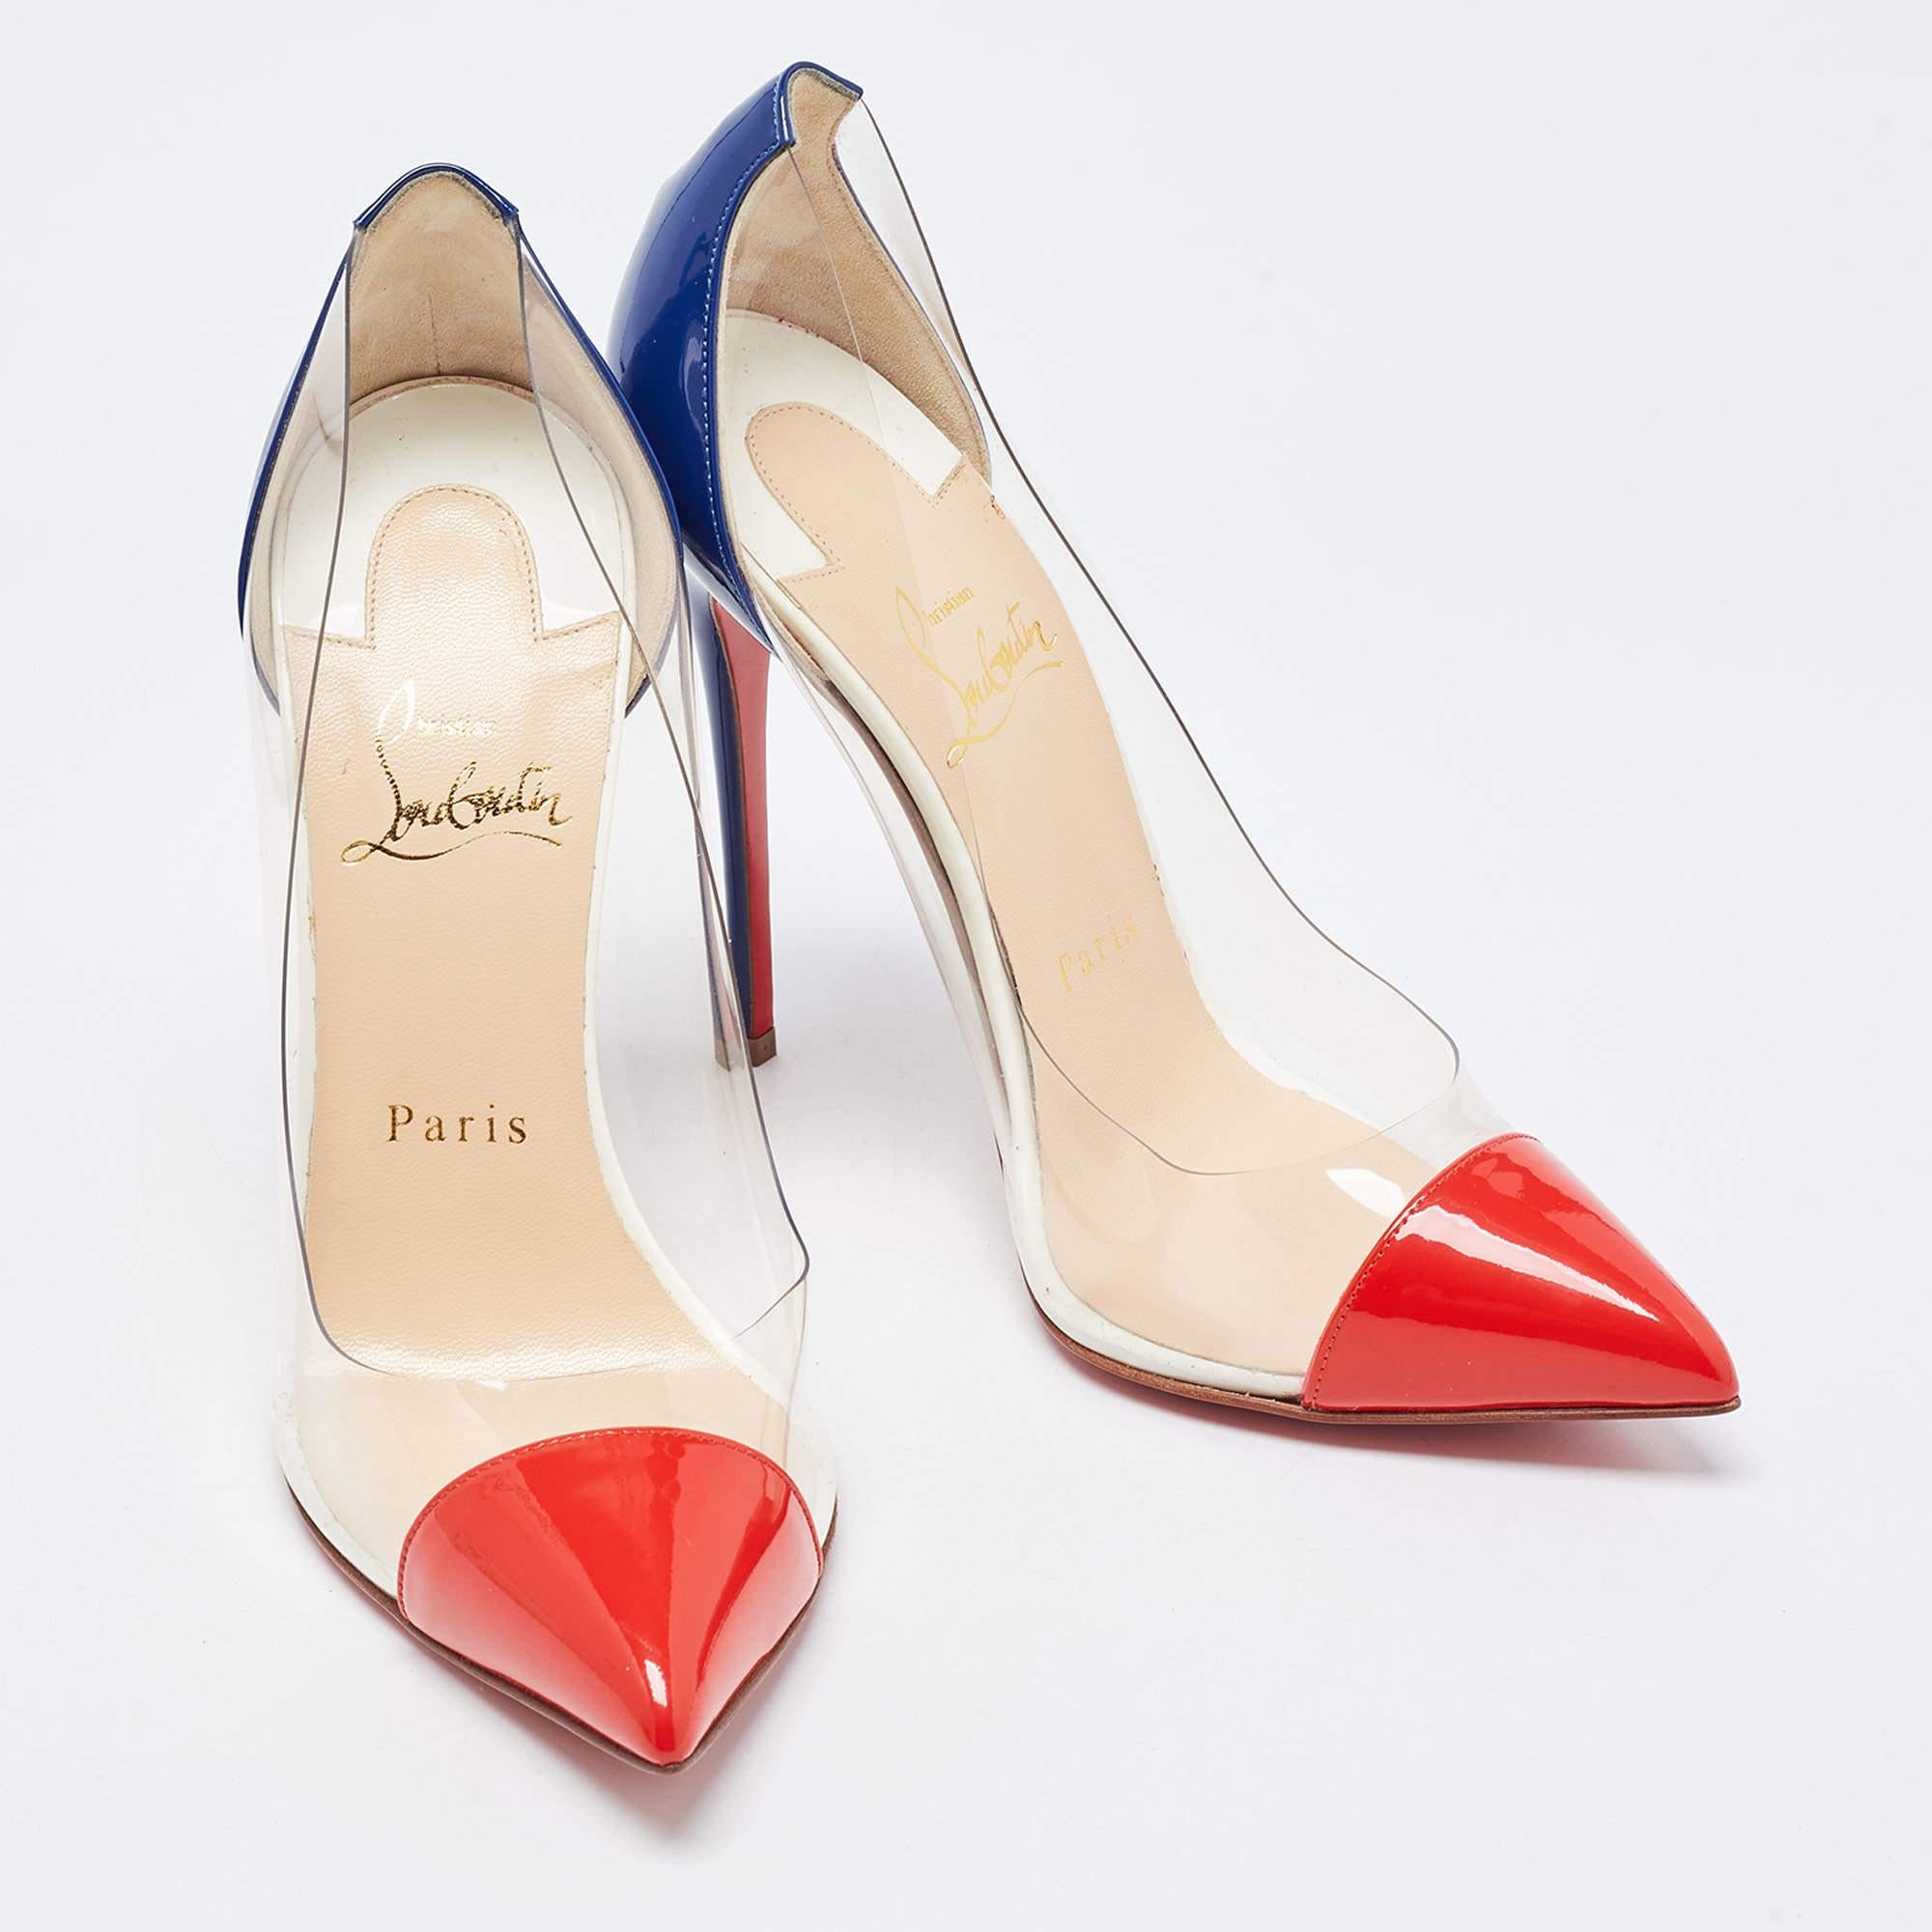 Women's Christian Louboutin Red/Blue Patent Leather and PVC Debout Pumps Size 37